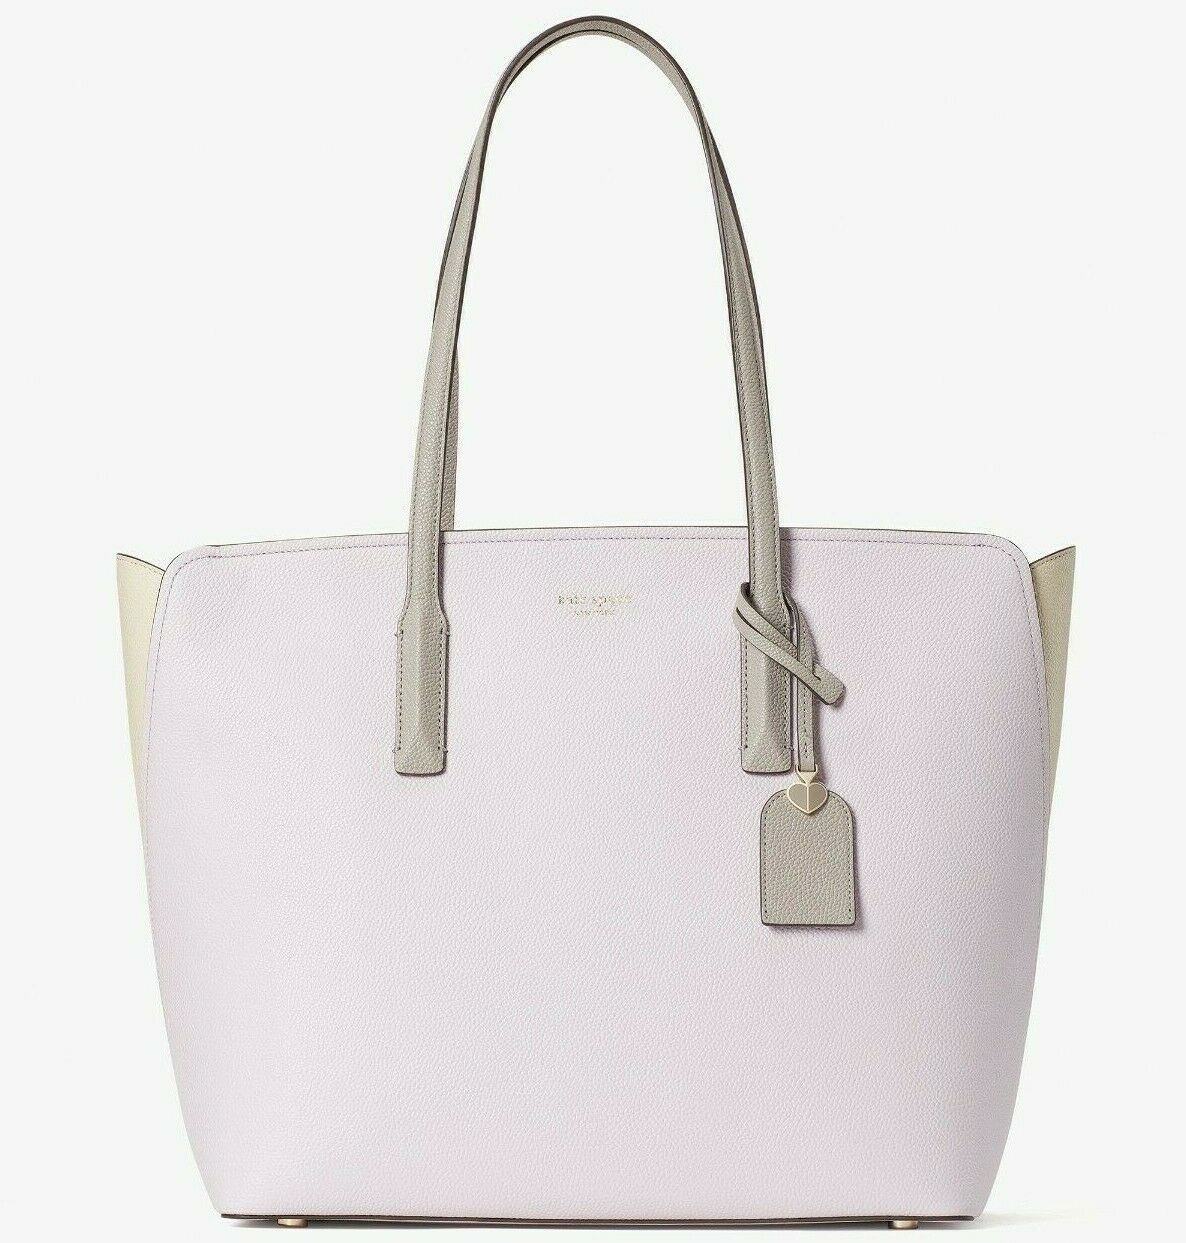 Kate Spade Margaux Lilac Moonlight Leather Large Tote PXRUA226 NWT $298 MSRP FS